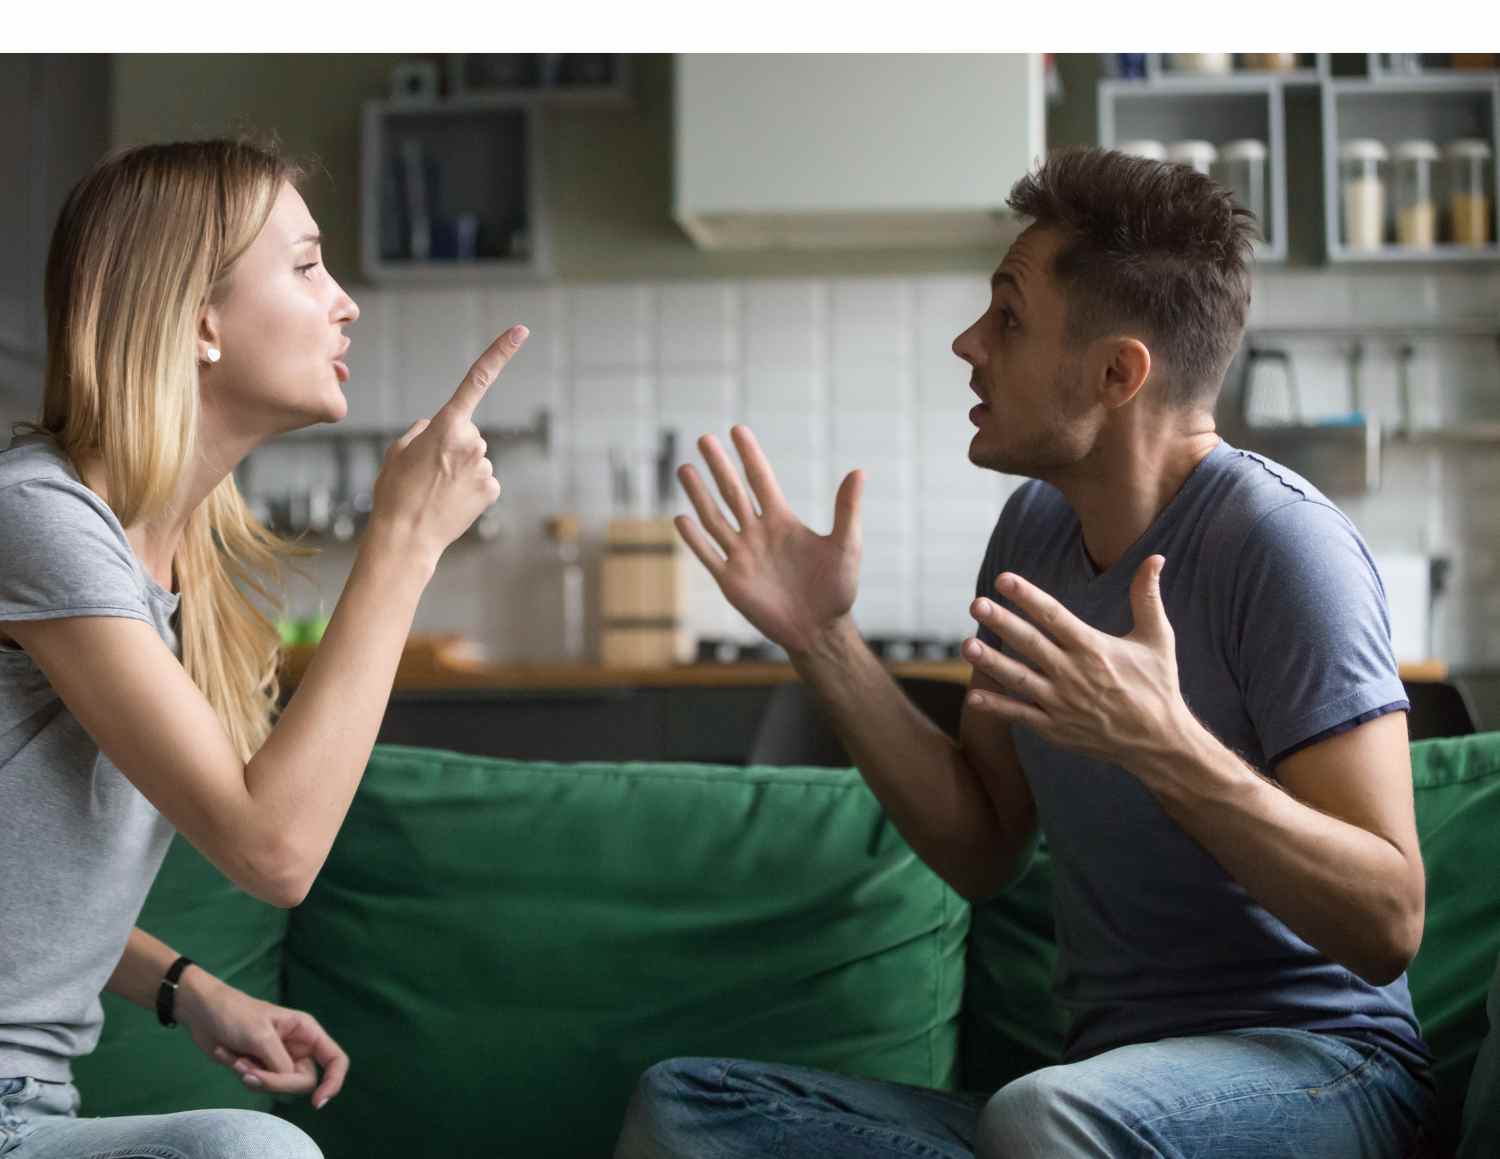 Angry Argument Woman and Man